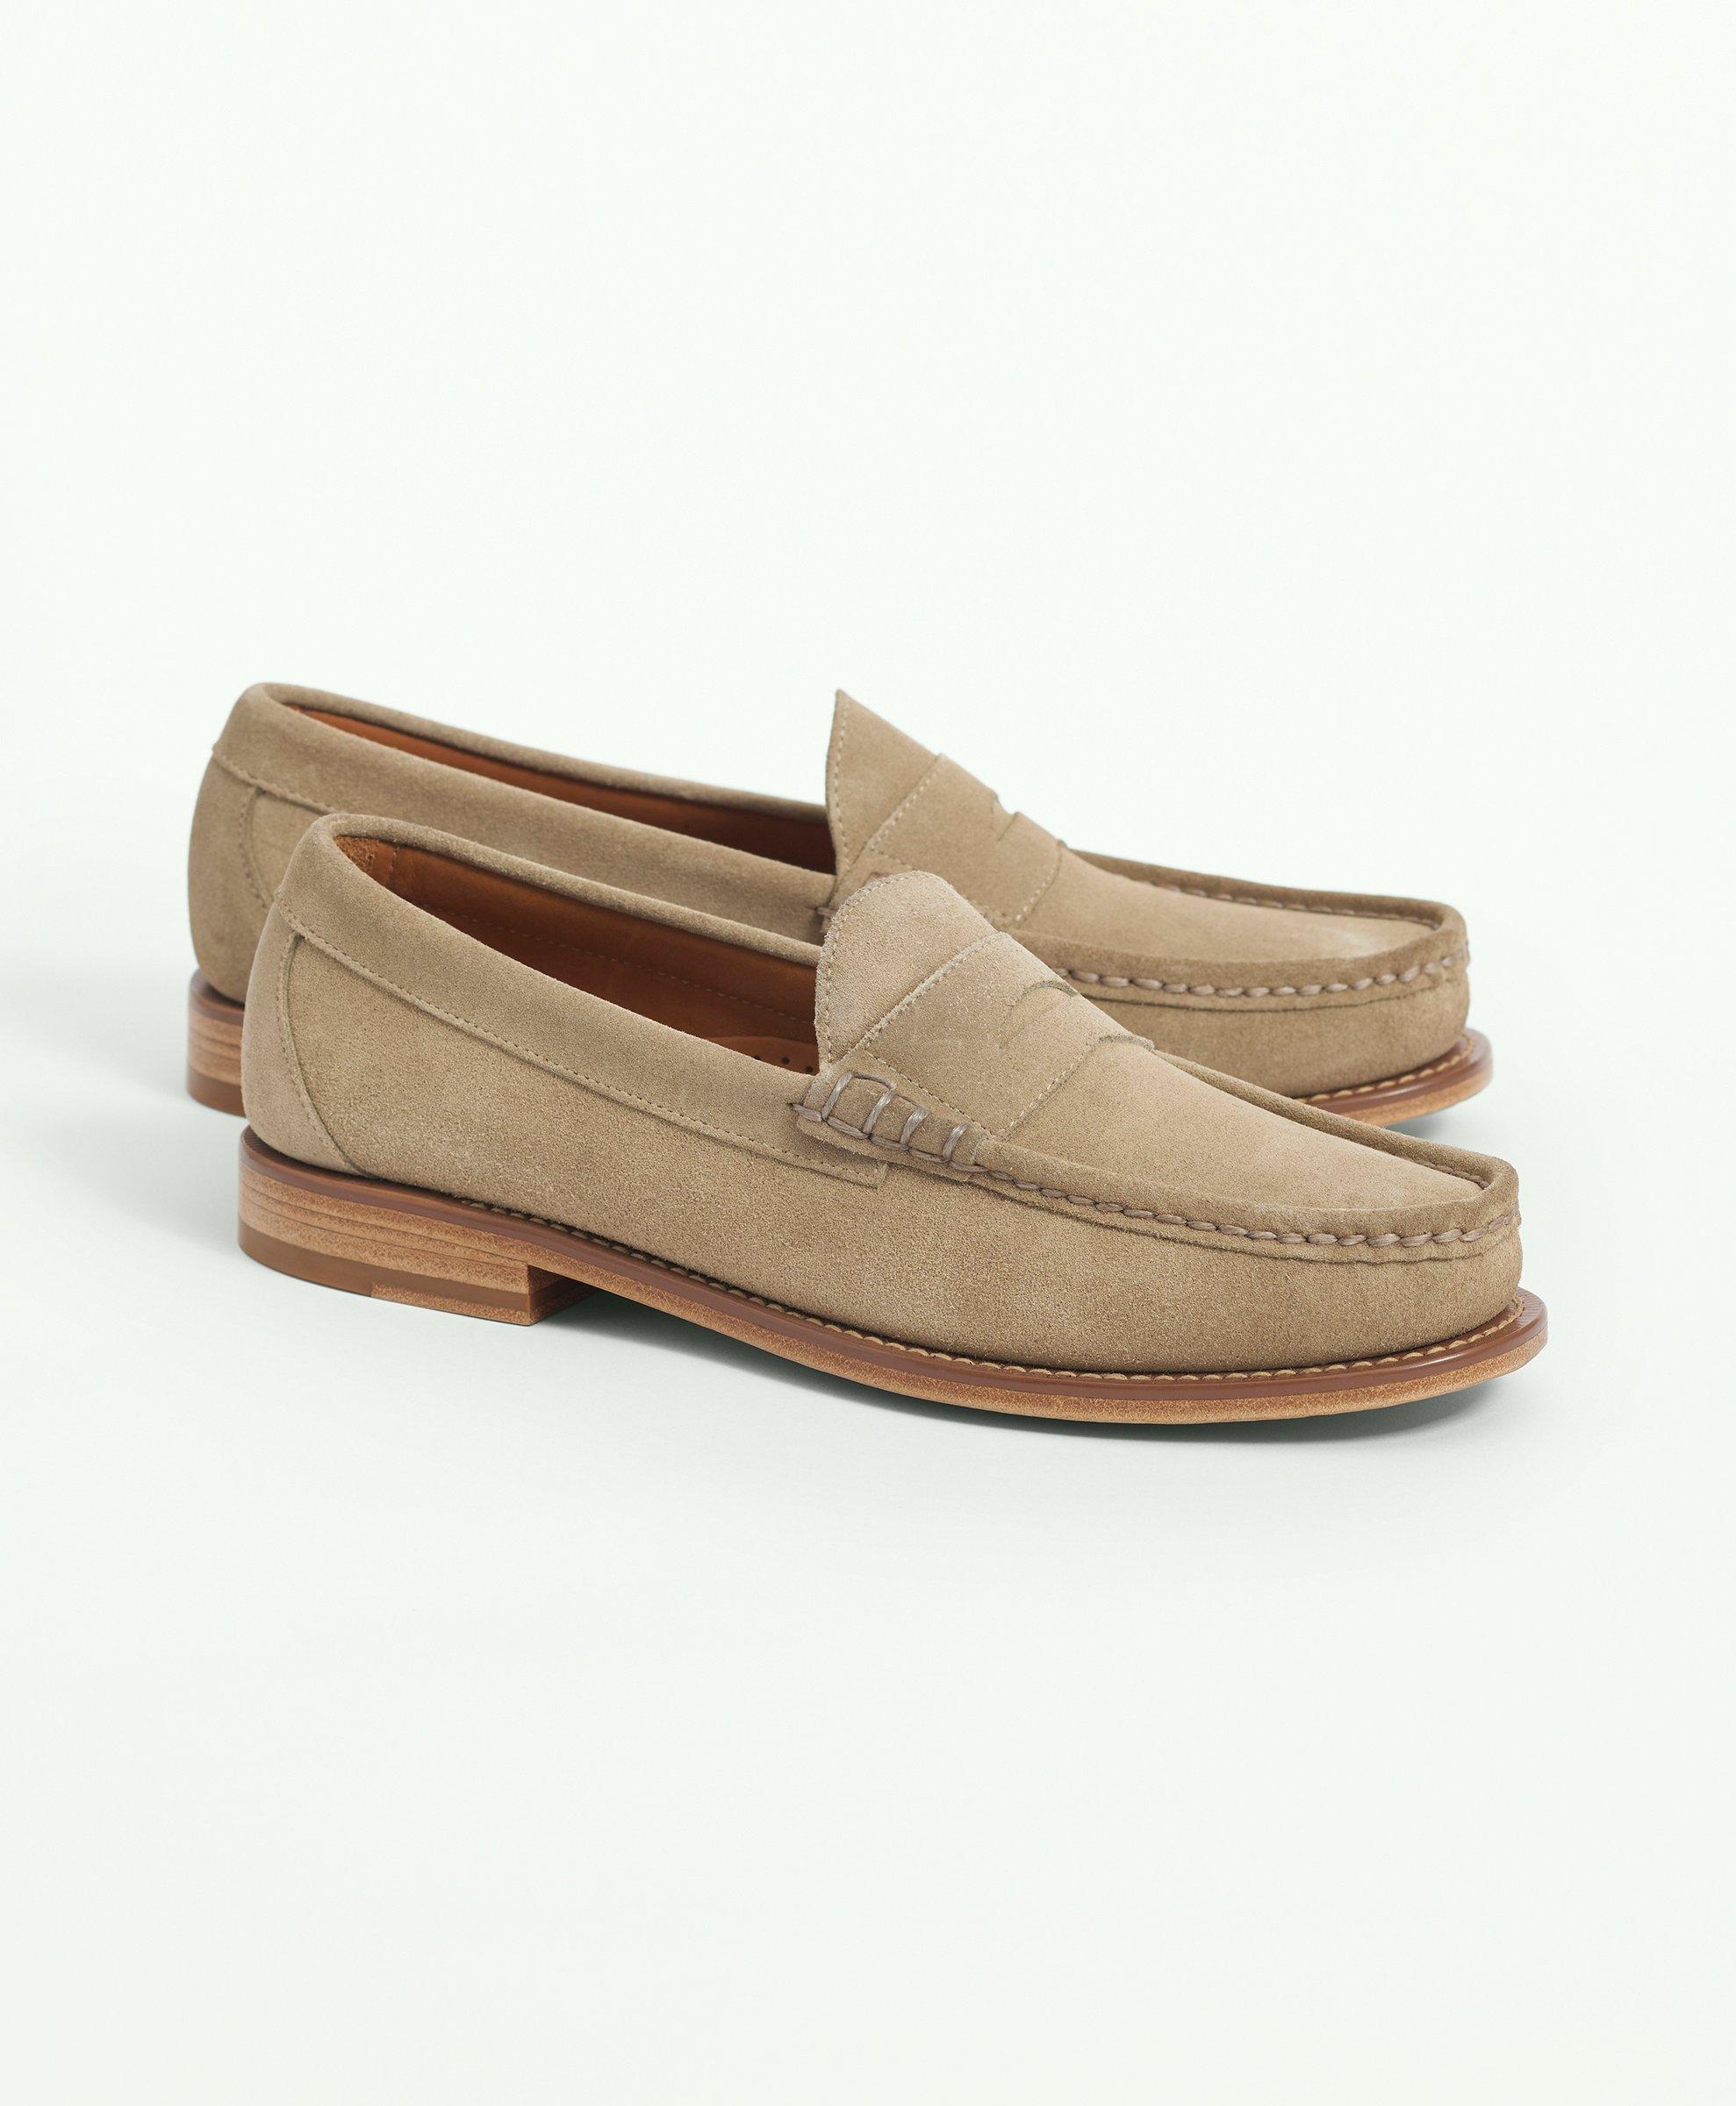 Shop Men's Shoes | Loafers, Boots, & Dress Shoes | Brooks Brothers